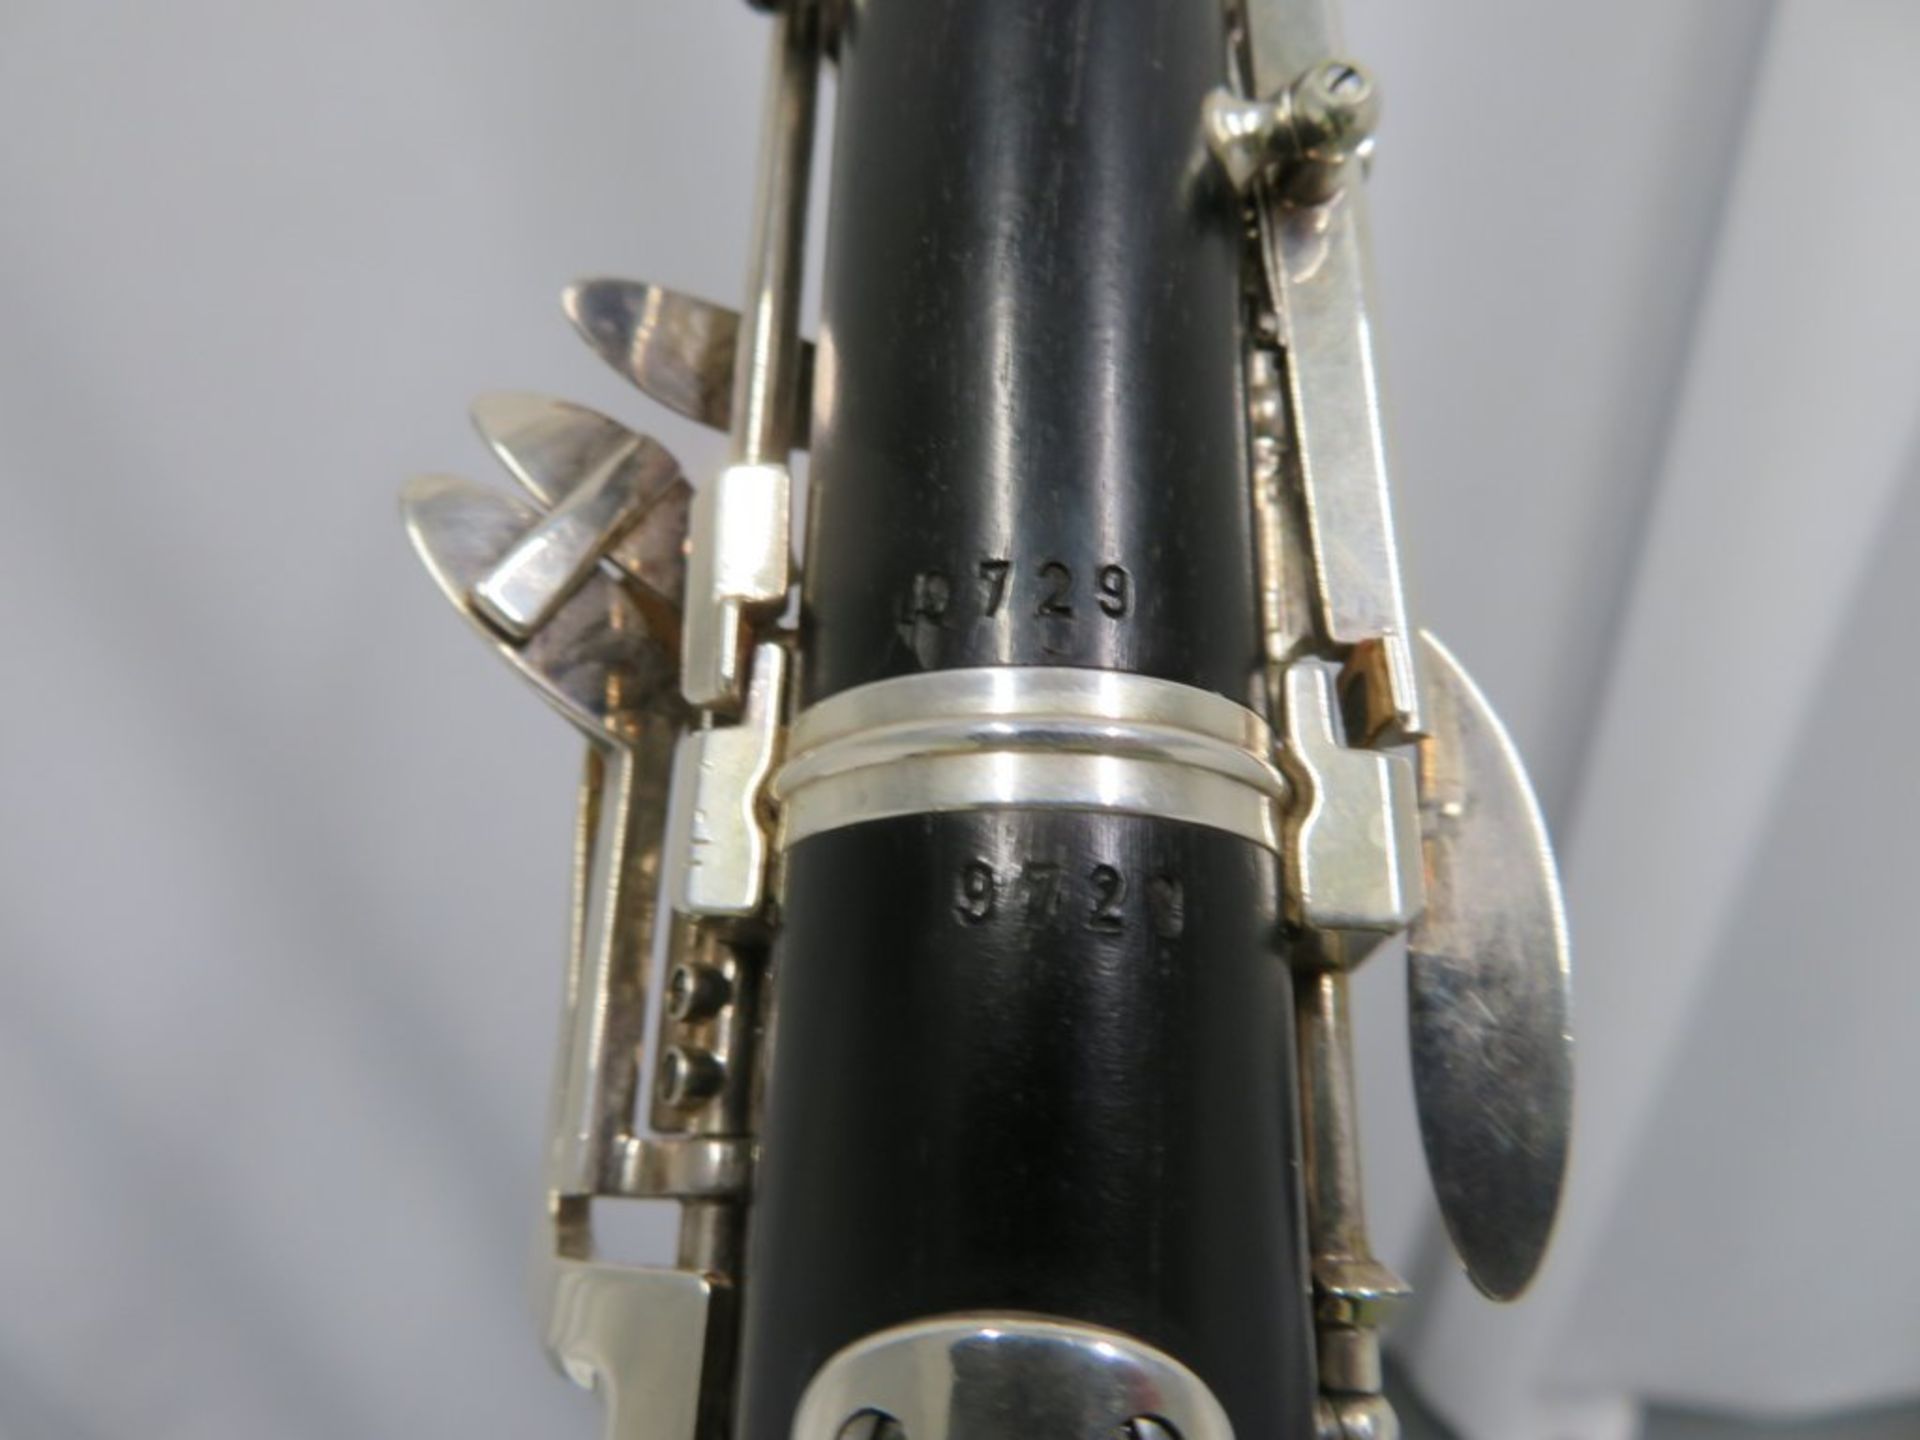 Buffet Crampon Oboe With Case. Serial Number: 9729. Please Note That This Item Has Not Be - Image 14 of 18